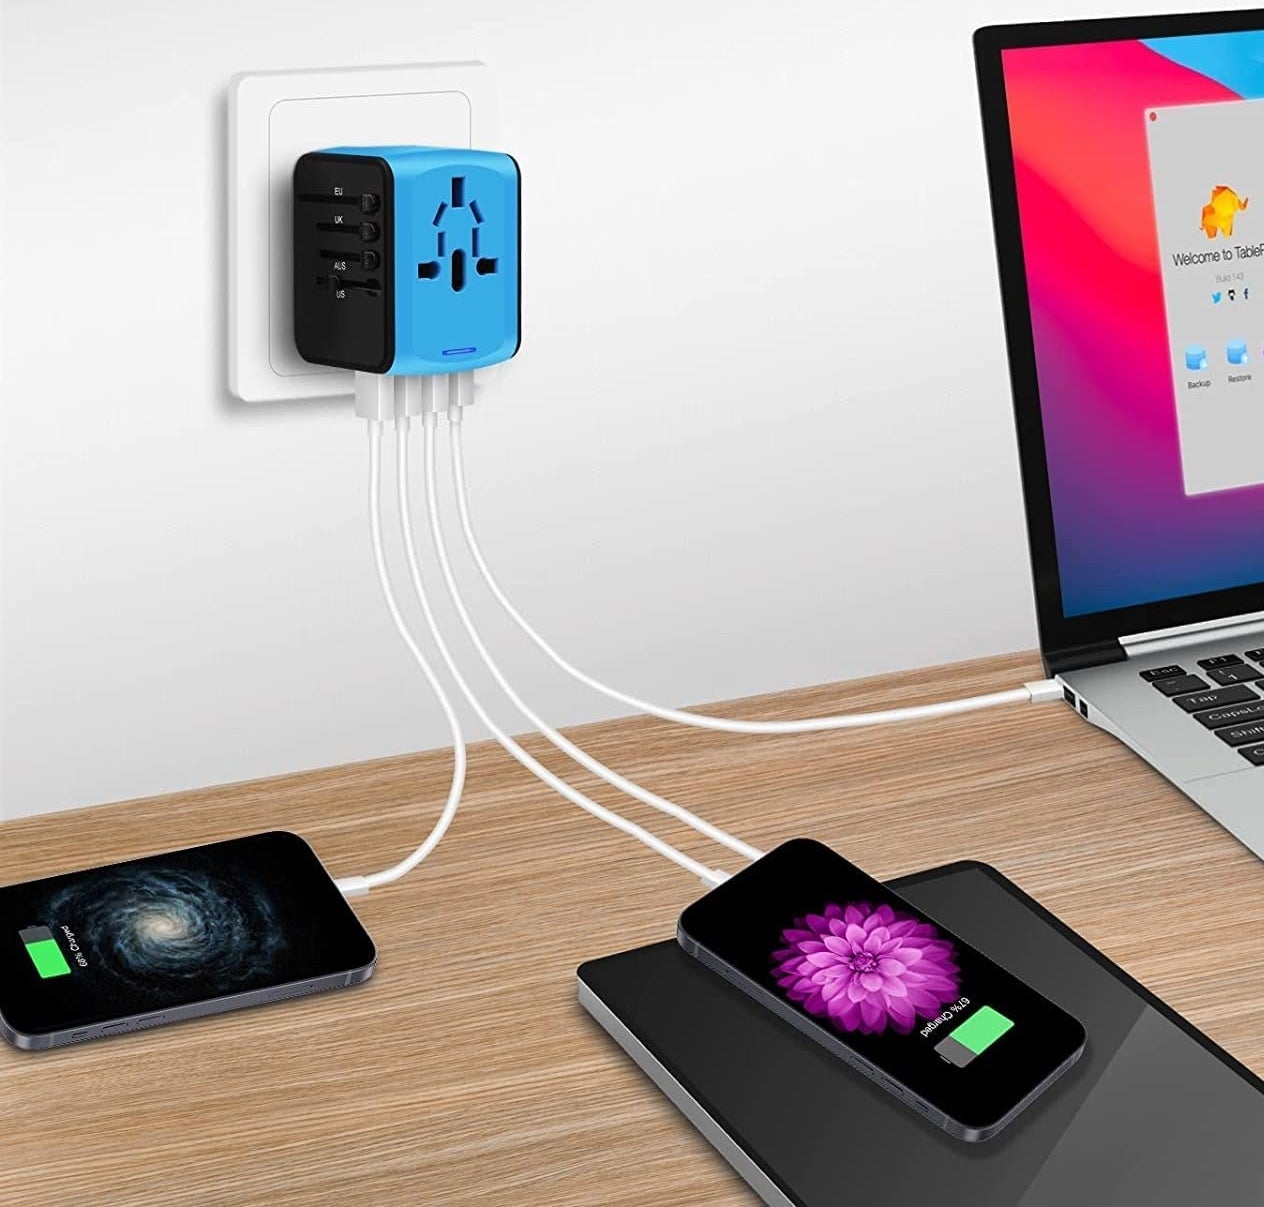 Three devices plugged into the adapter